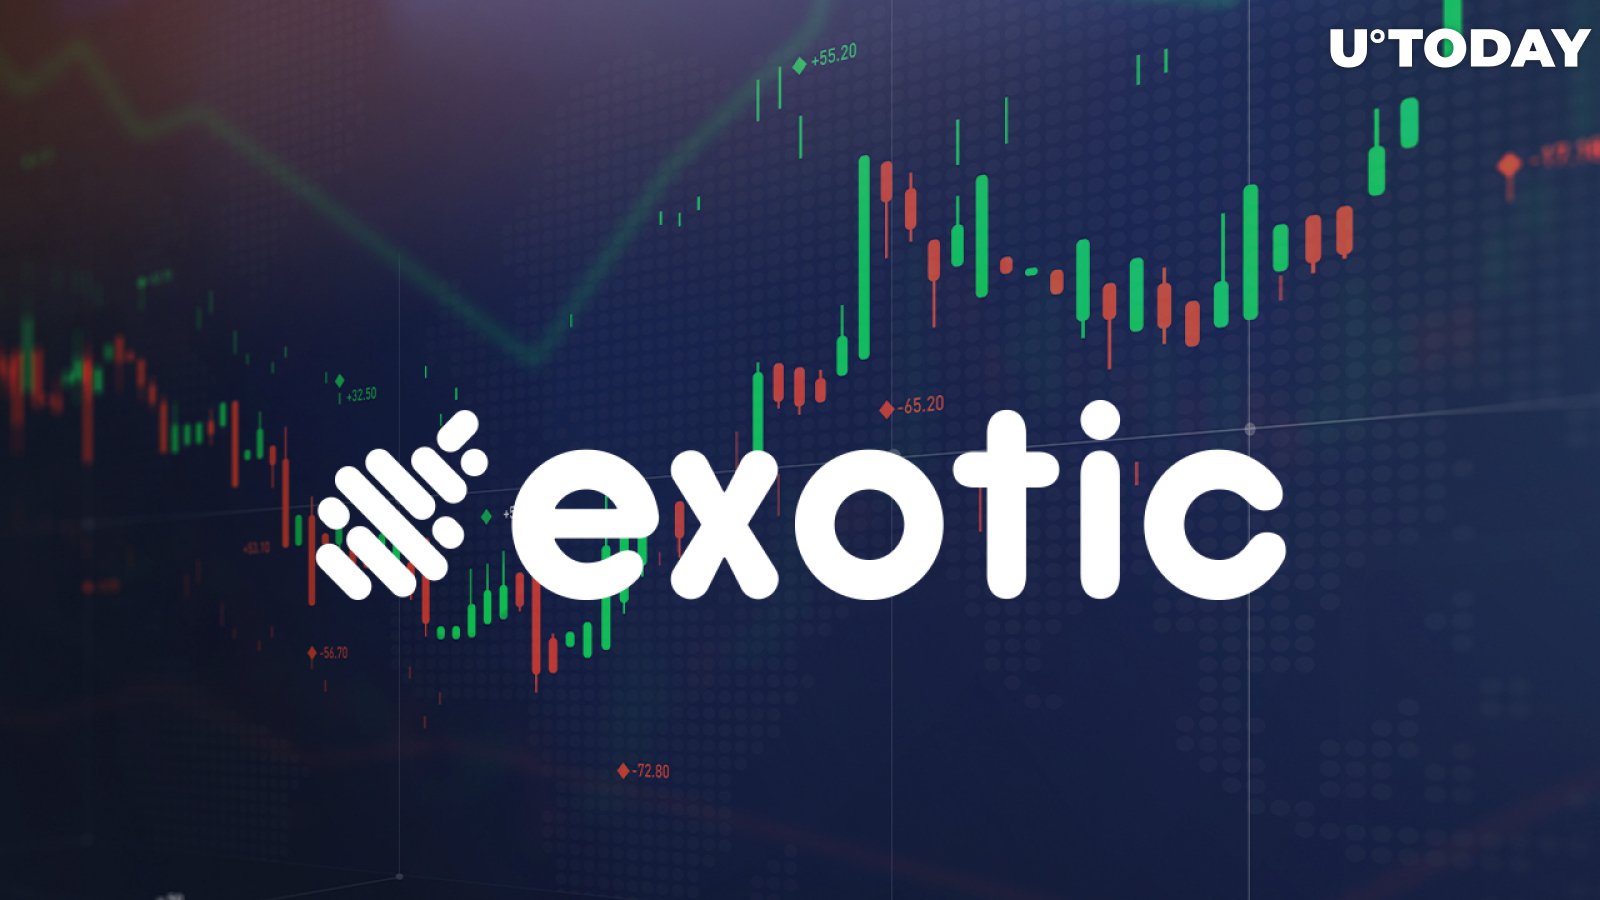 Exotic Markets Launches Dual Currency Note on Solana Blockchain